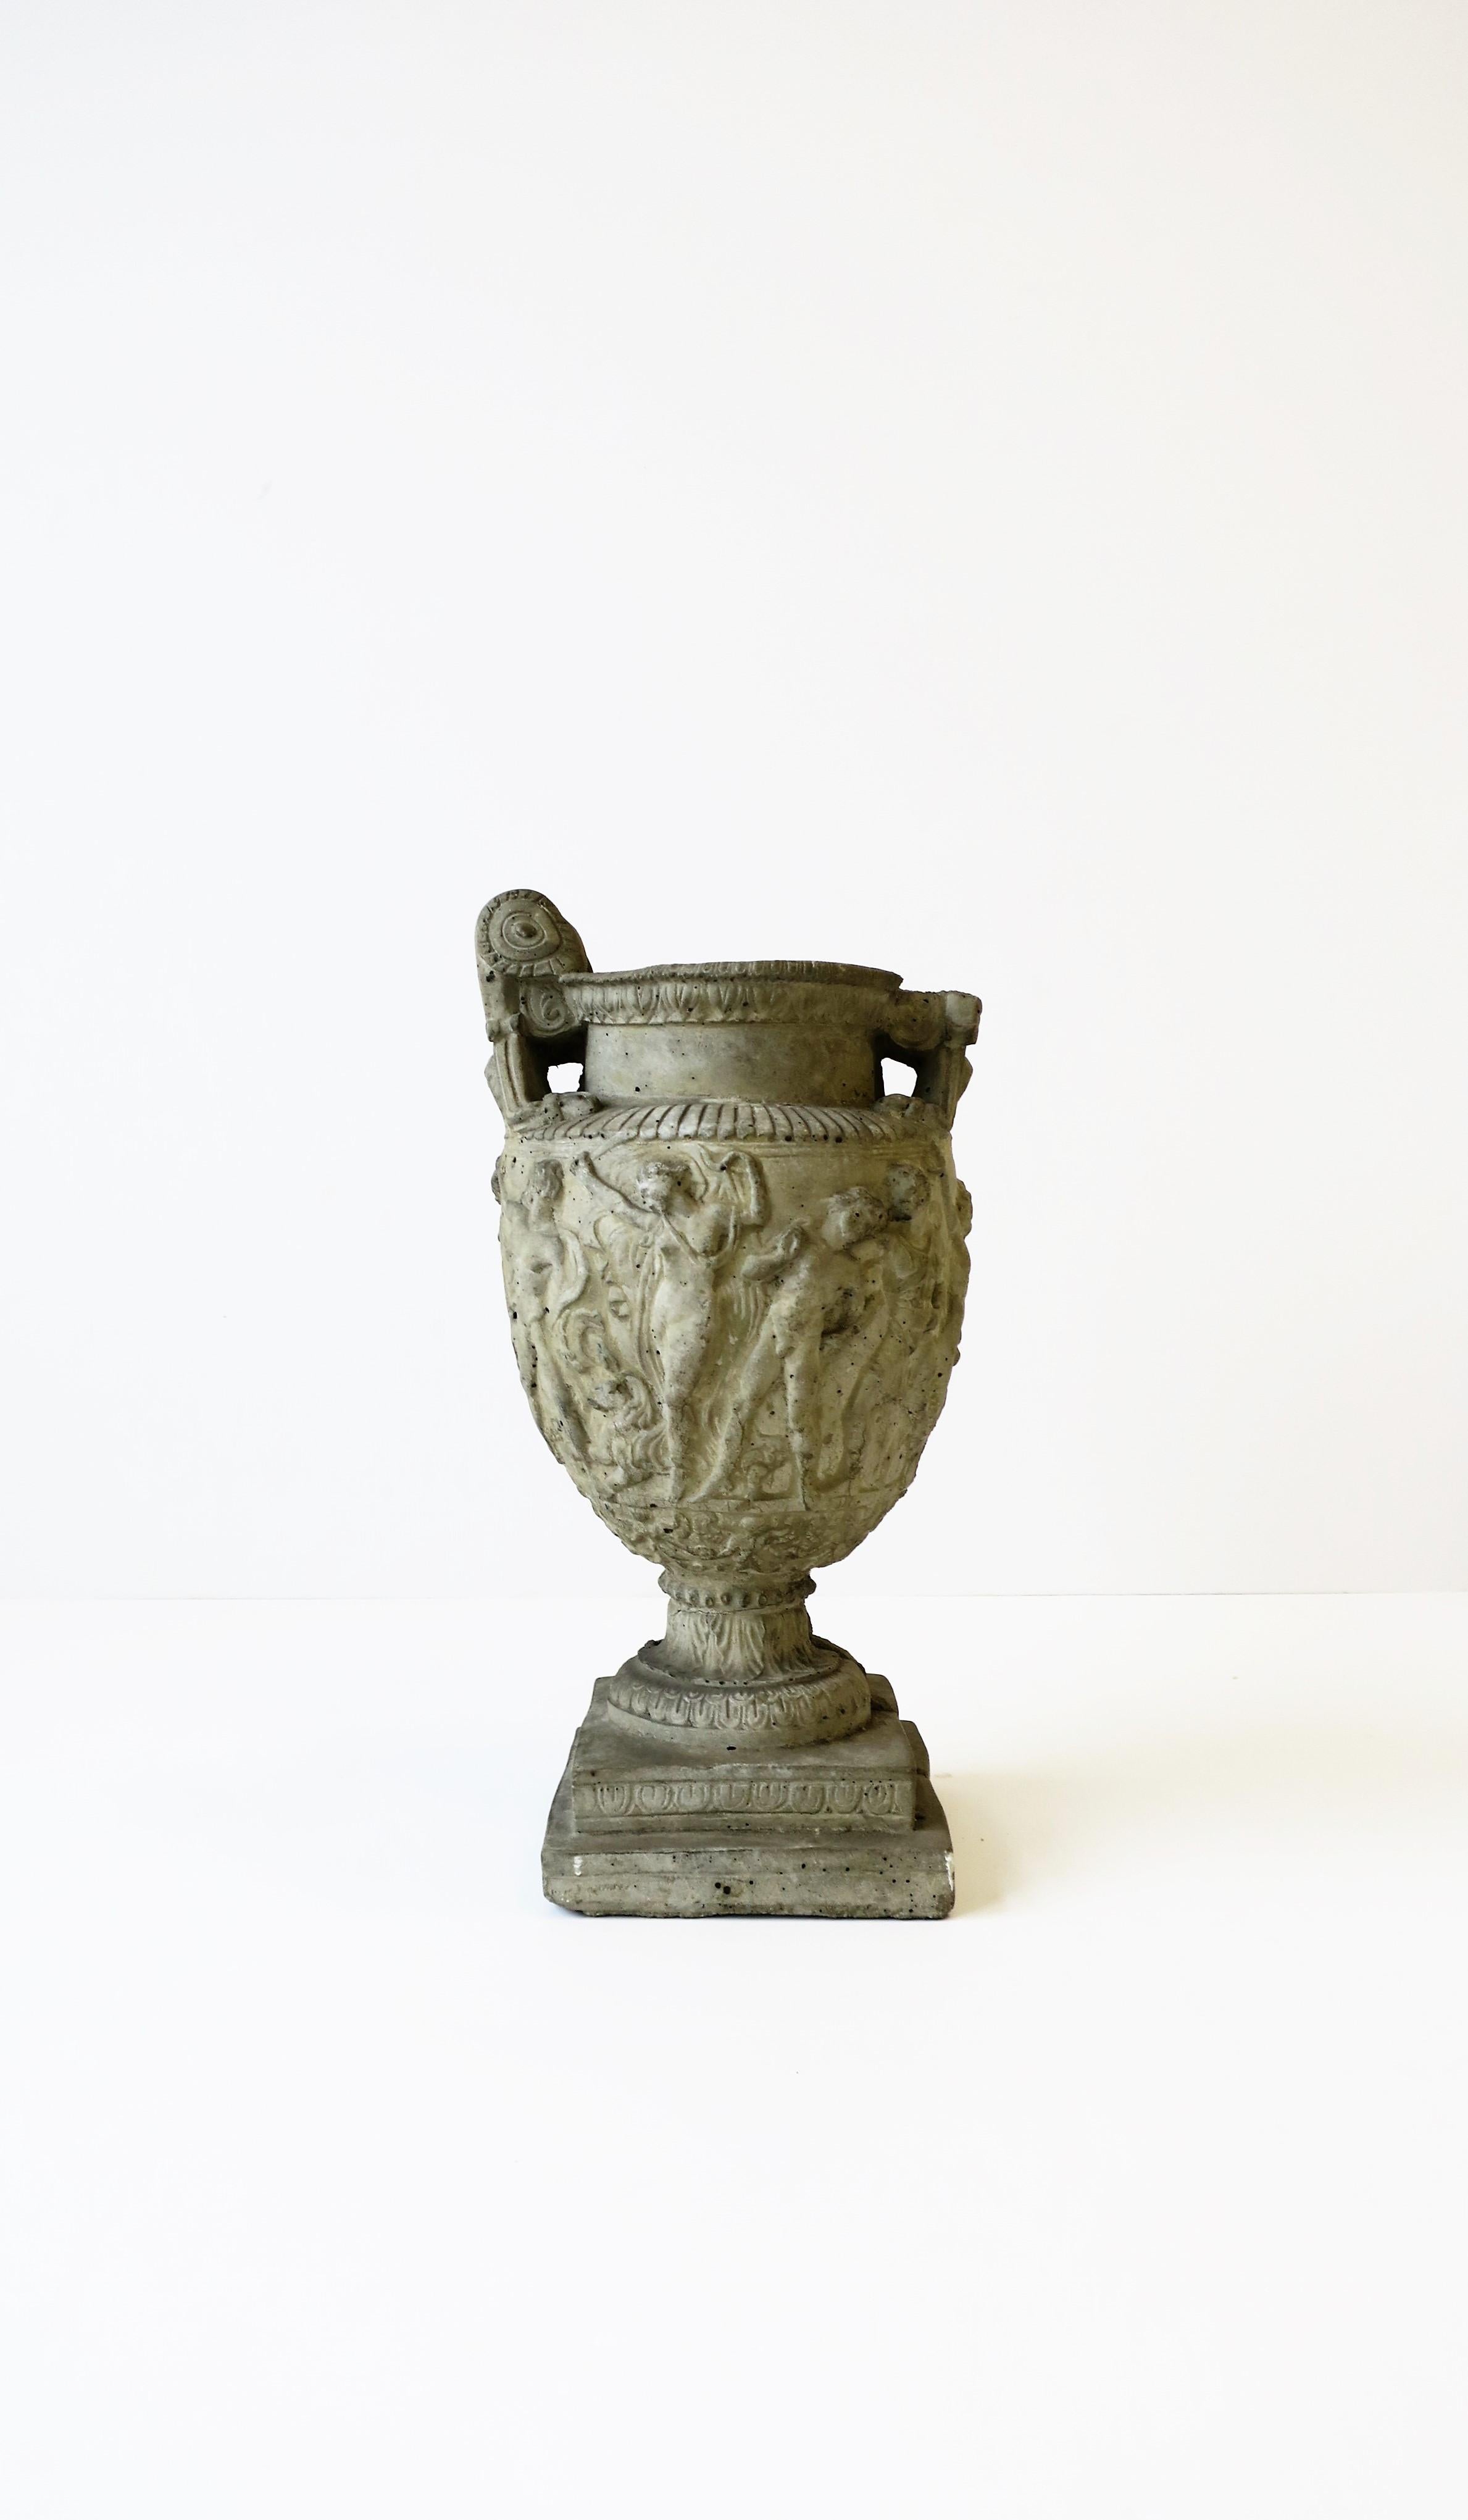 A neoclassical urn sculpture piece or planter jardinière, circa 20th century. A beautiful piece made from cement/concrete with all the details of the neoclassical style. Piece can be use as a decorative urn sculpture or as a planter as show in